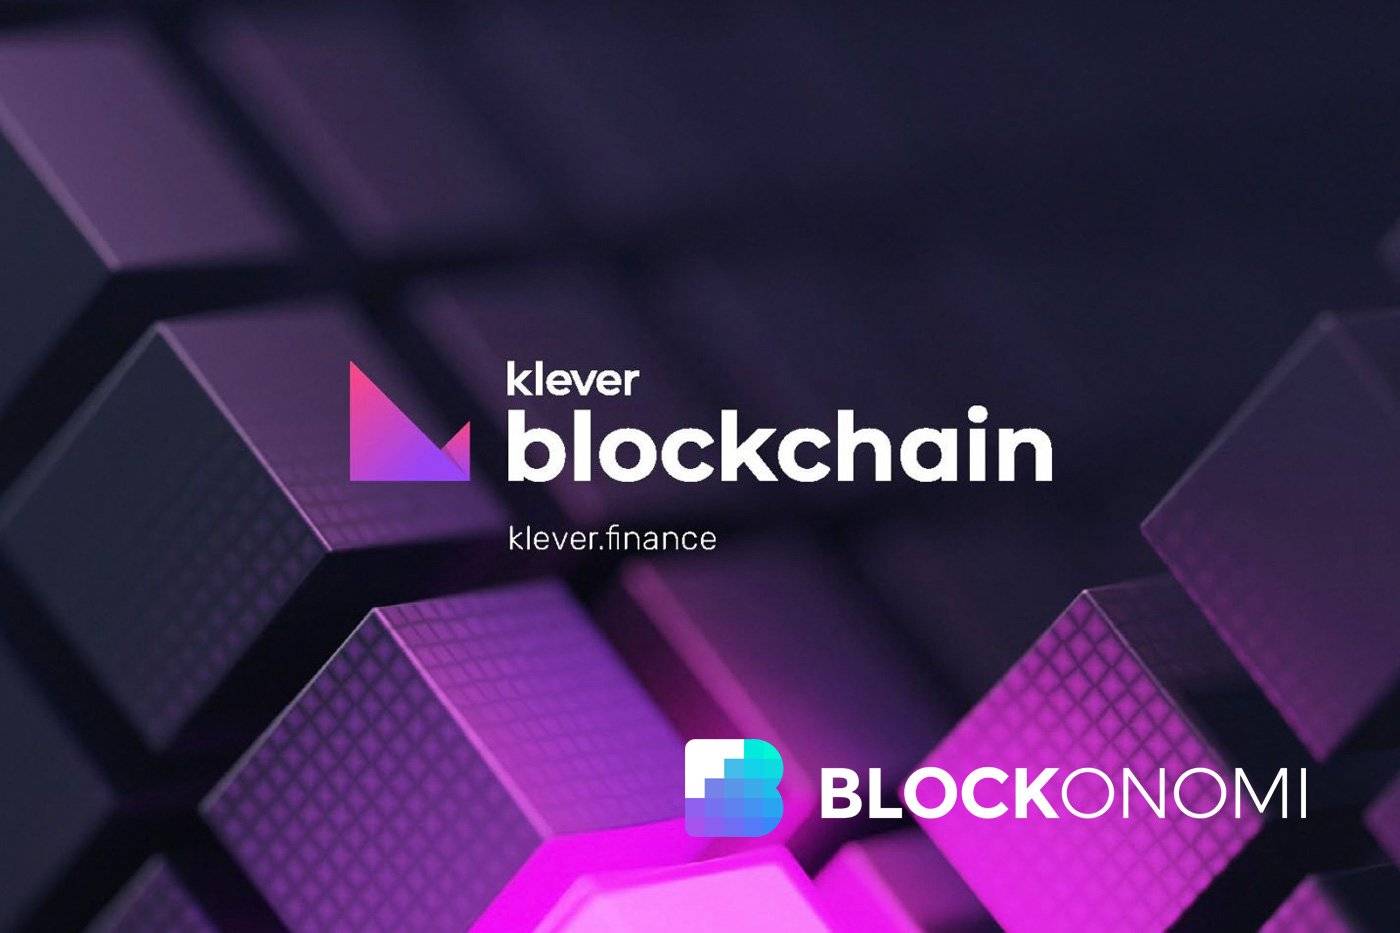 Klever Blockchain Goes Live With Whitepaper and 100,000 KLV Competition